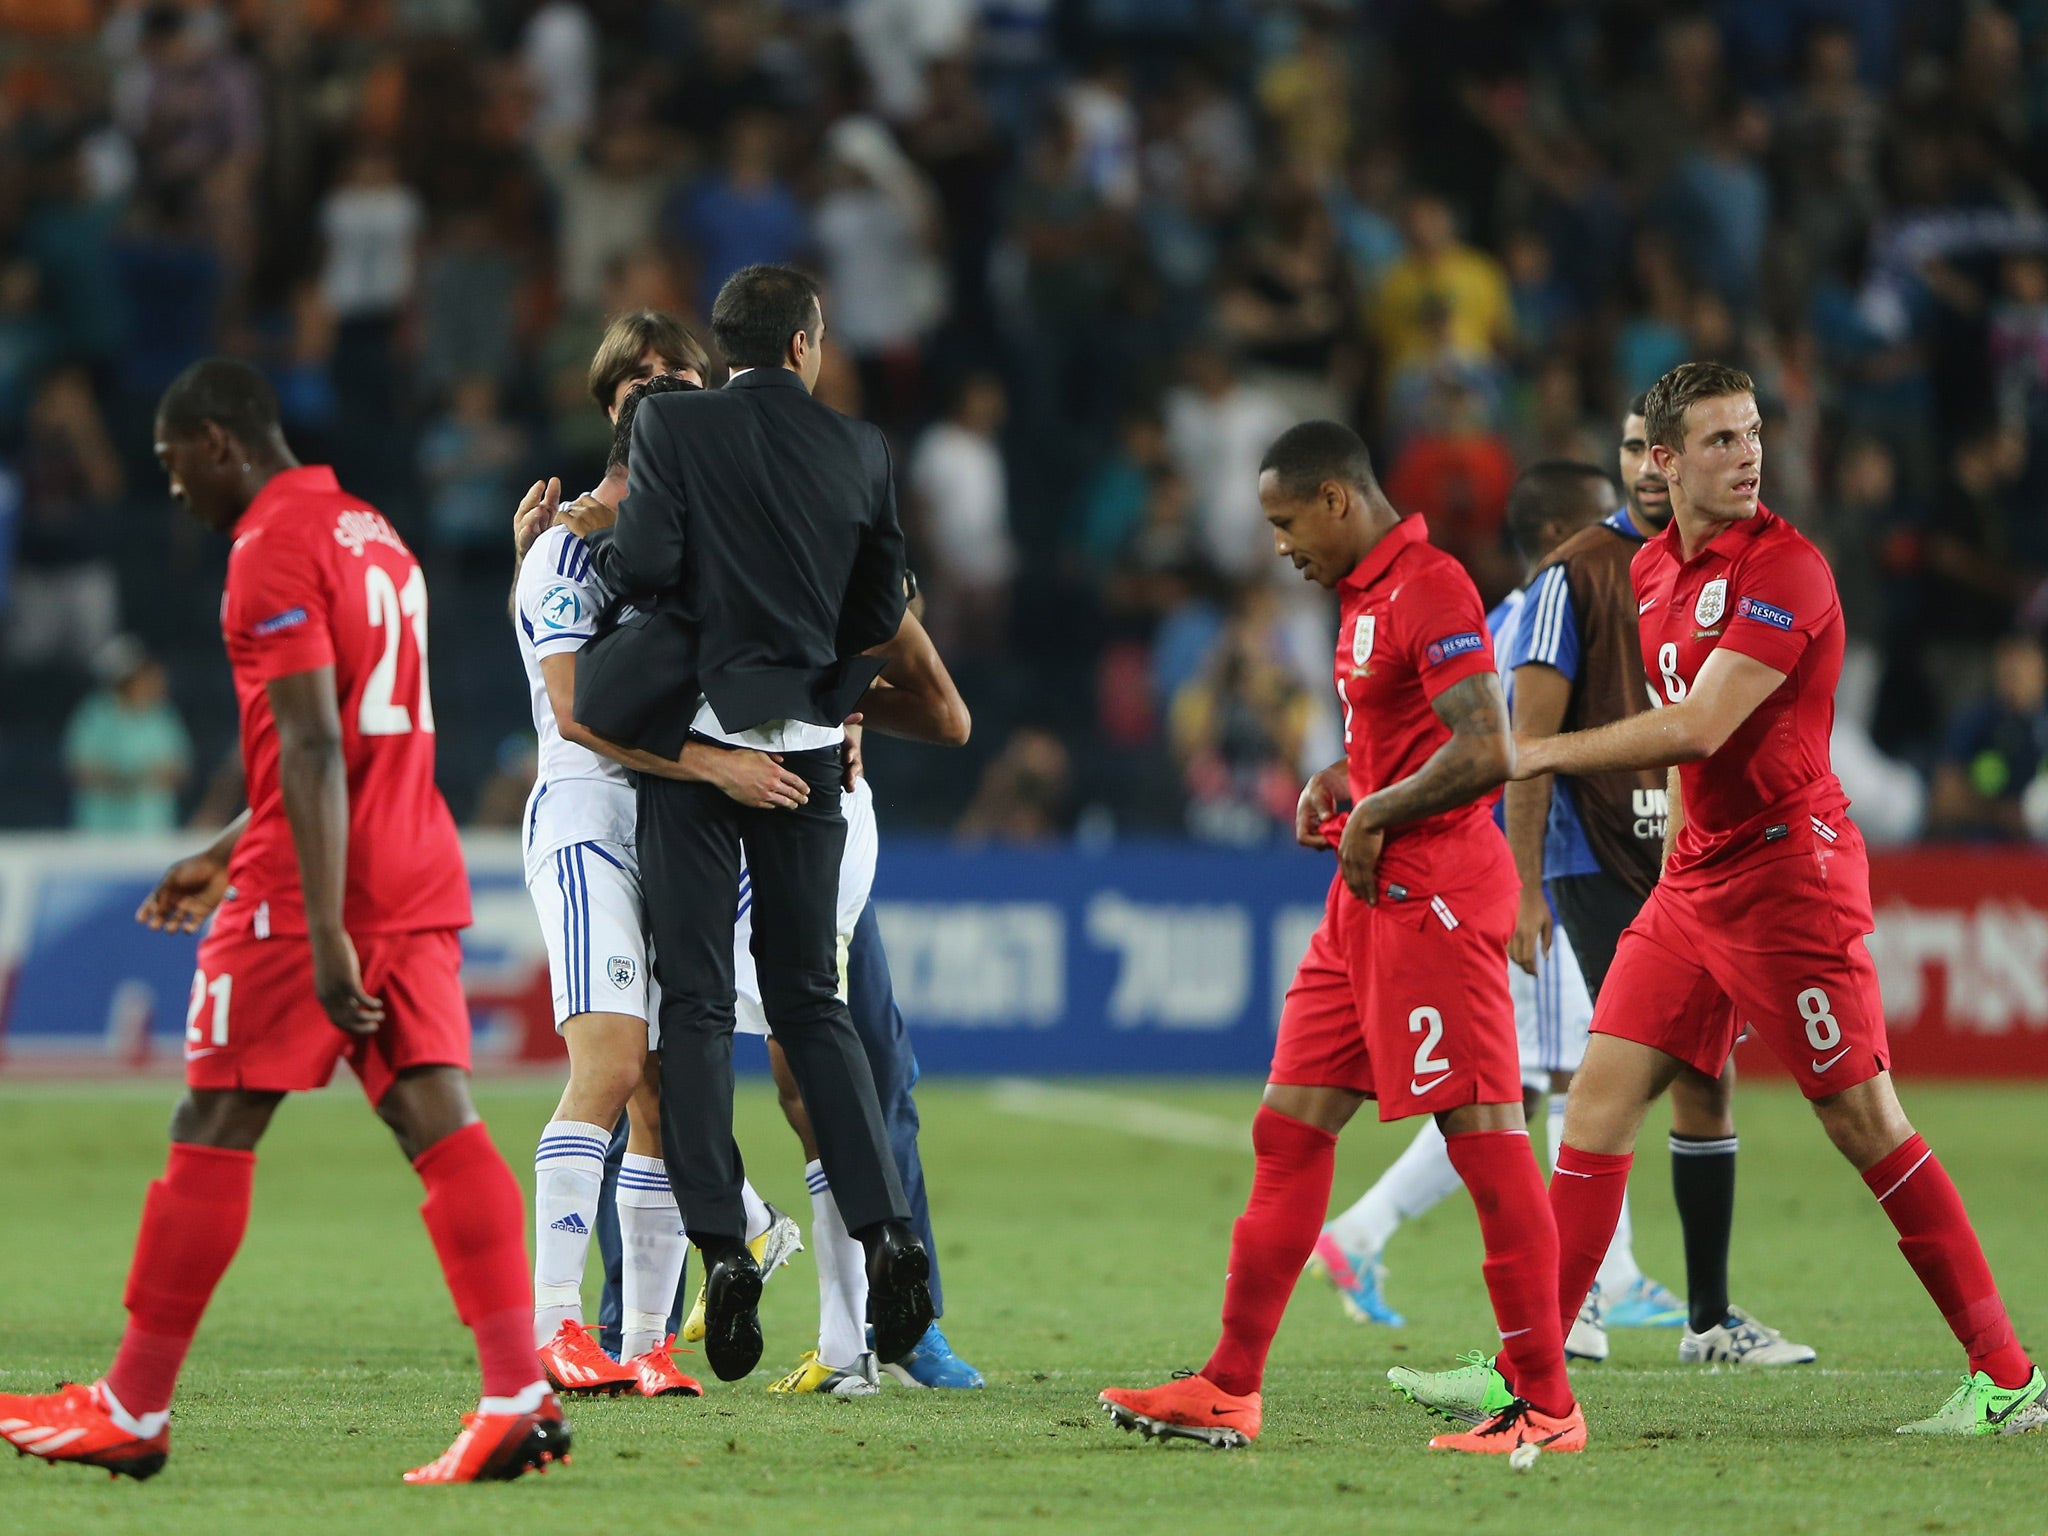 The England Under-21s lost all three of their matches